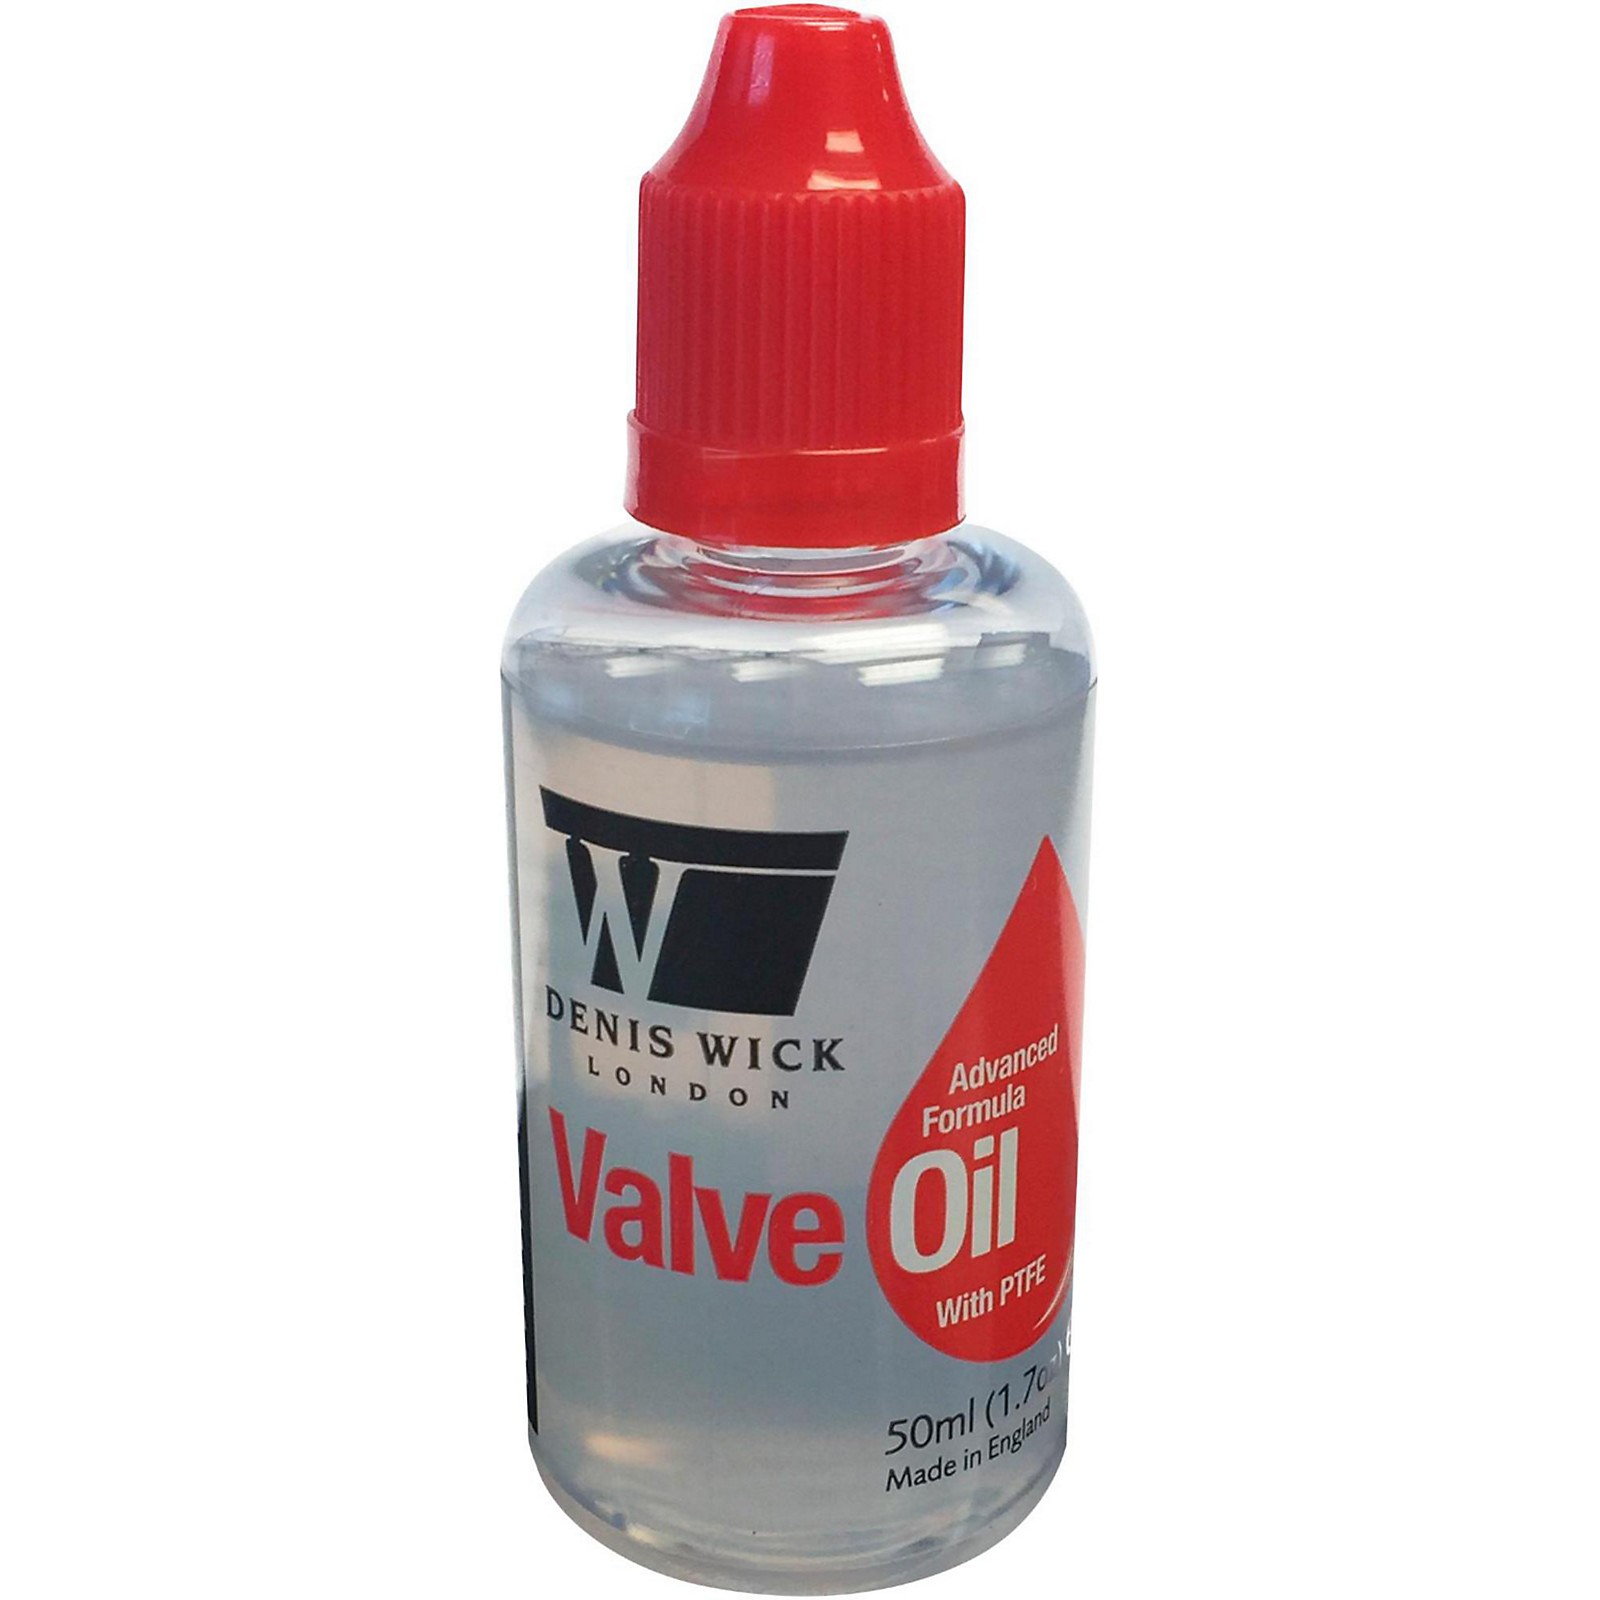 Trumpet Lubricants: Valve Oil, Slide Grease, and General